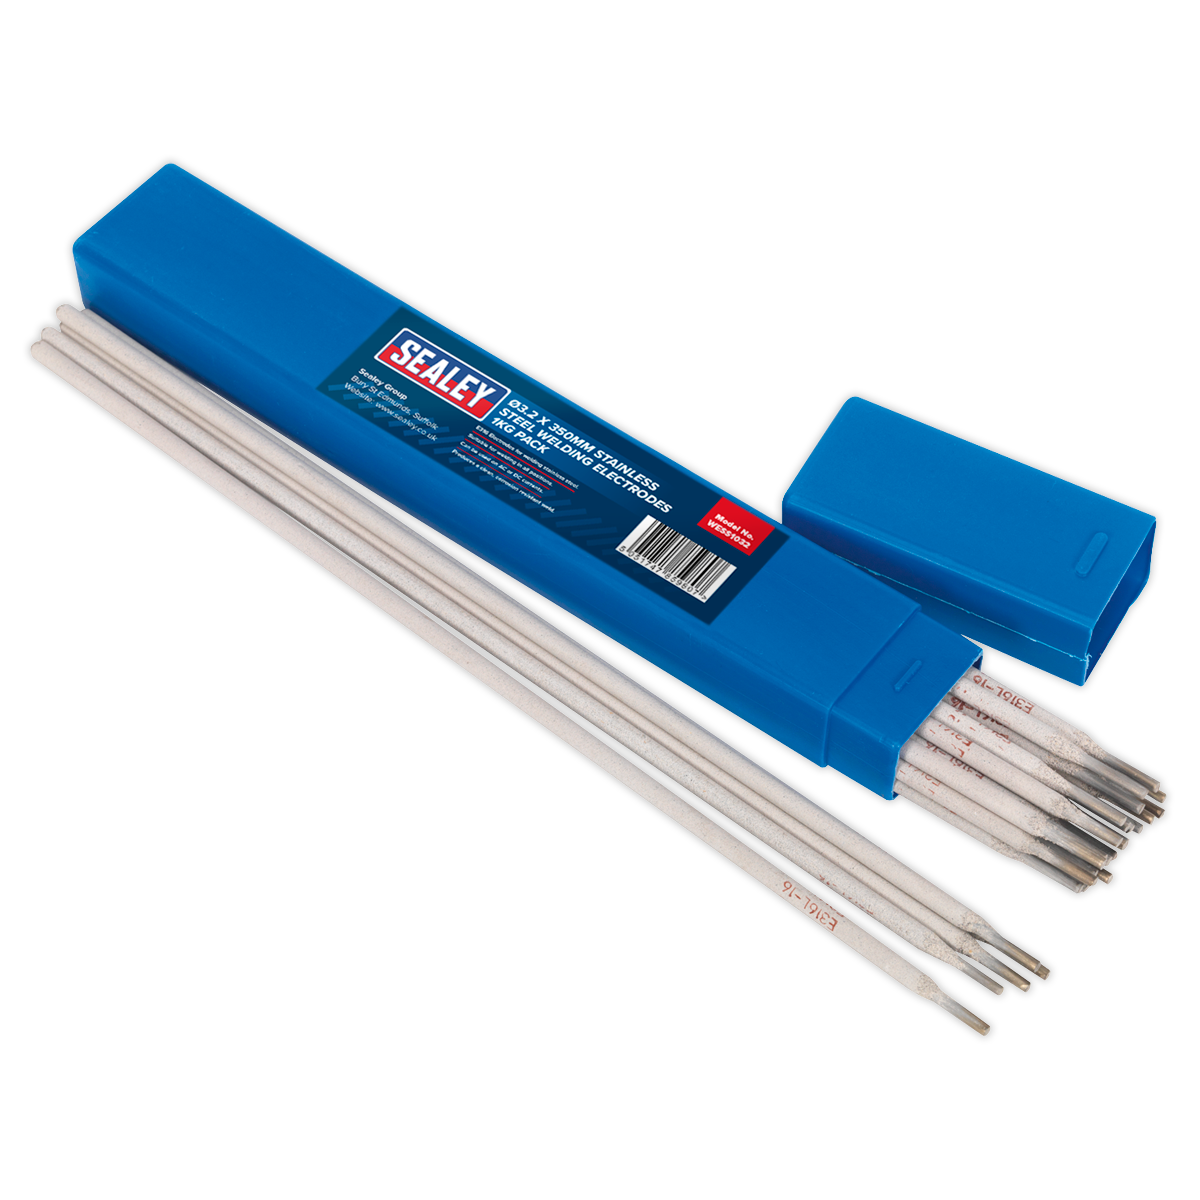 Welding Electrodes Stainless Steel Ø3.2 x 350mm 1kg Pack